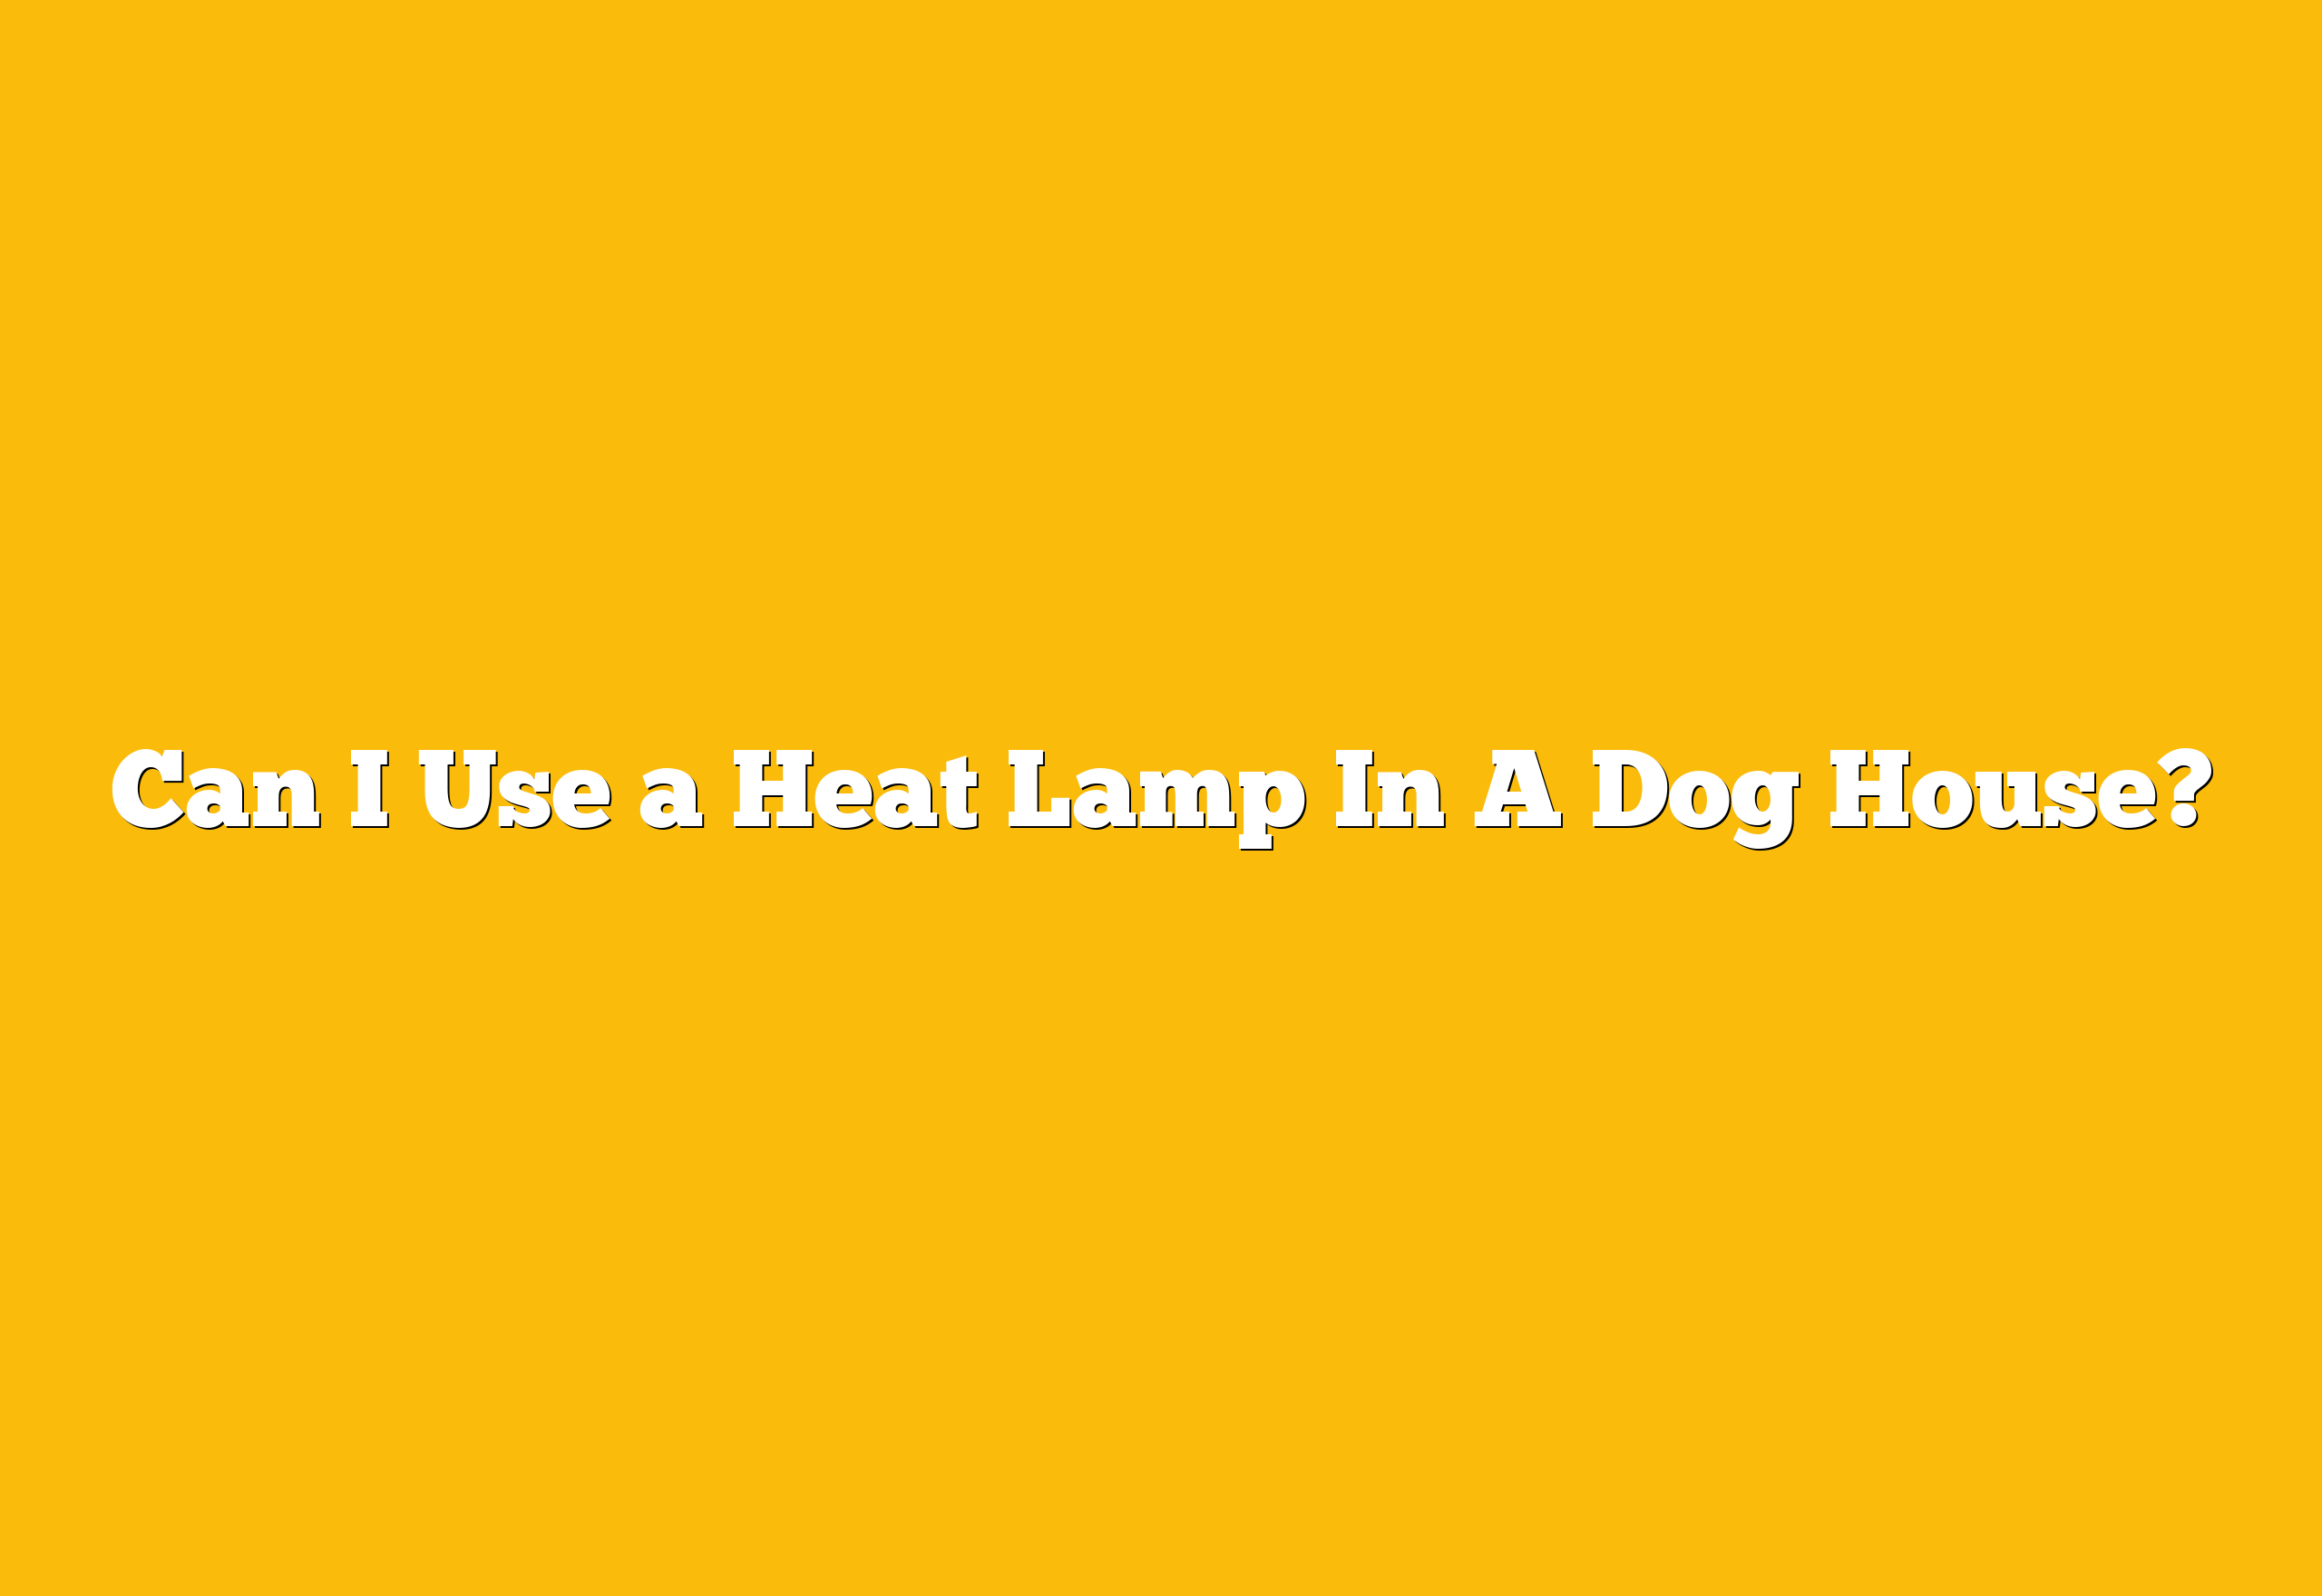 Can I Use a Heat Lamp In A Dog House?